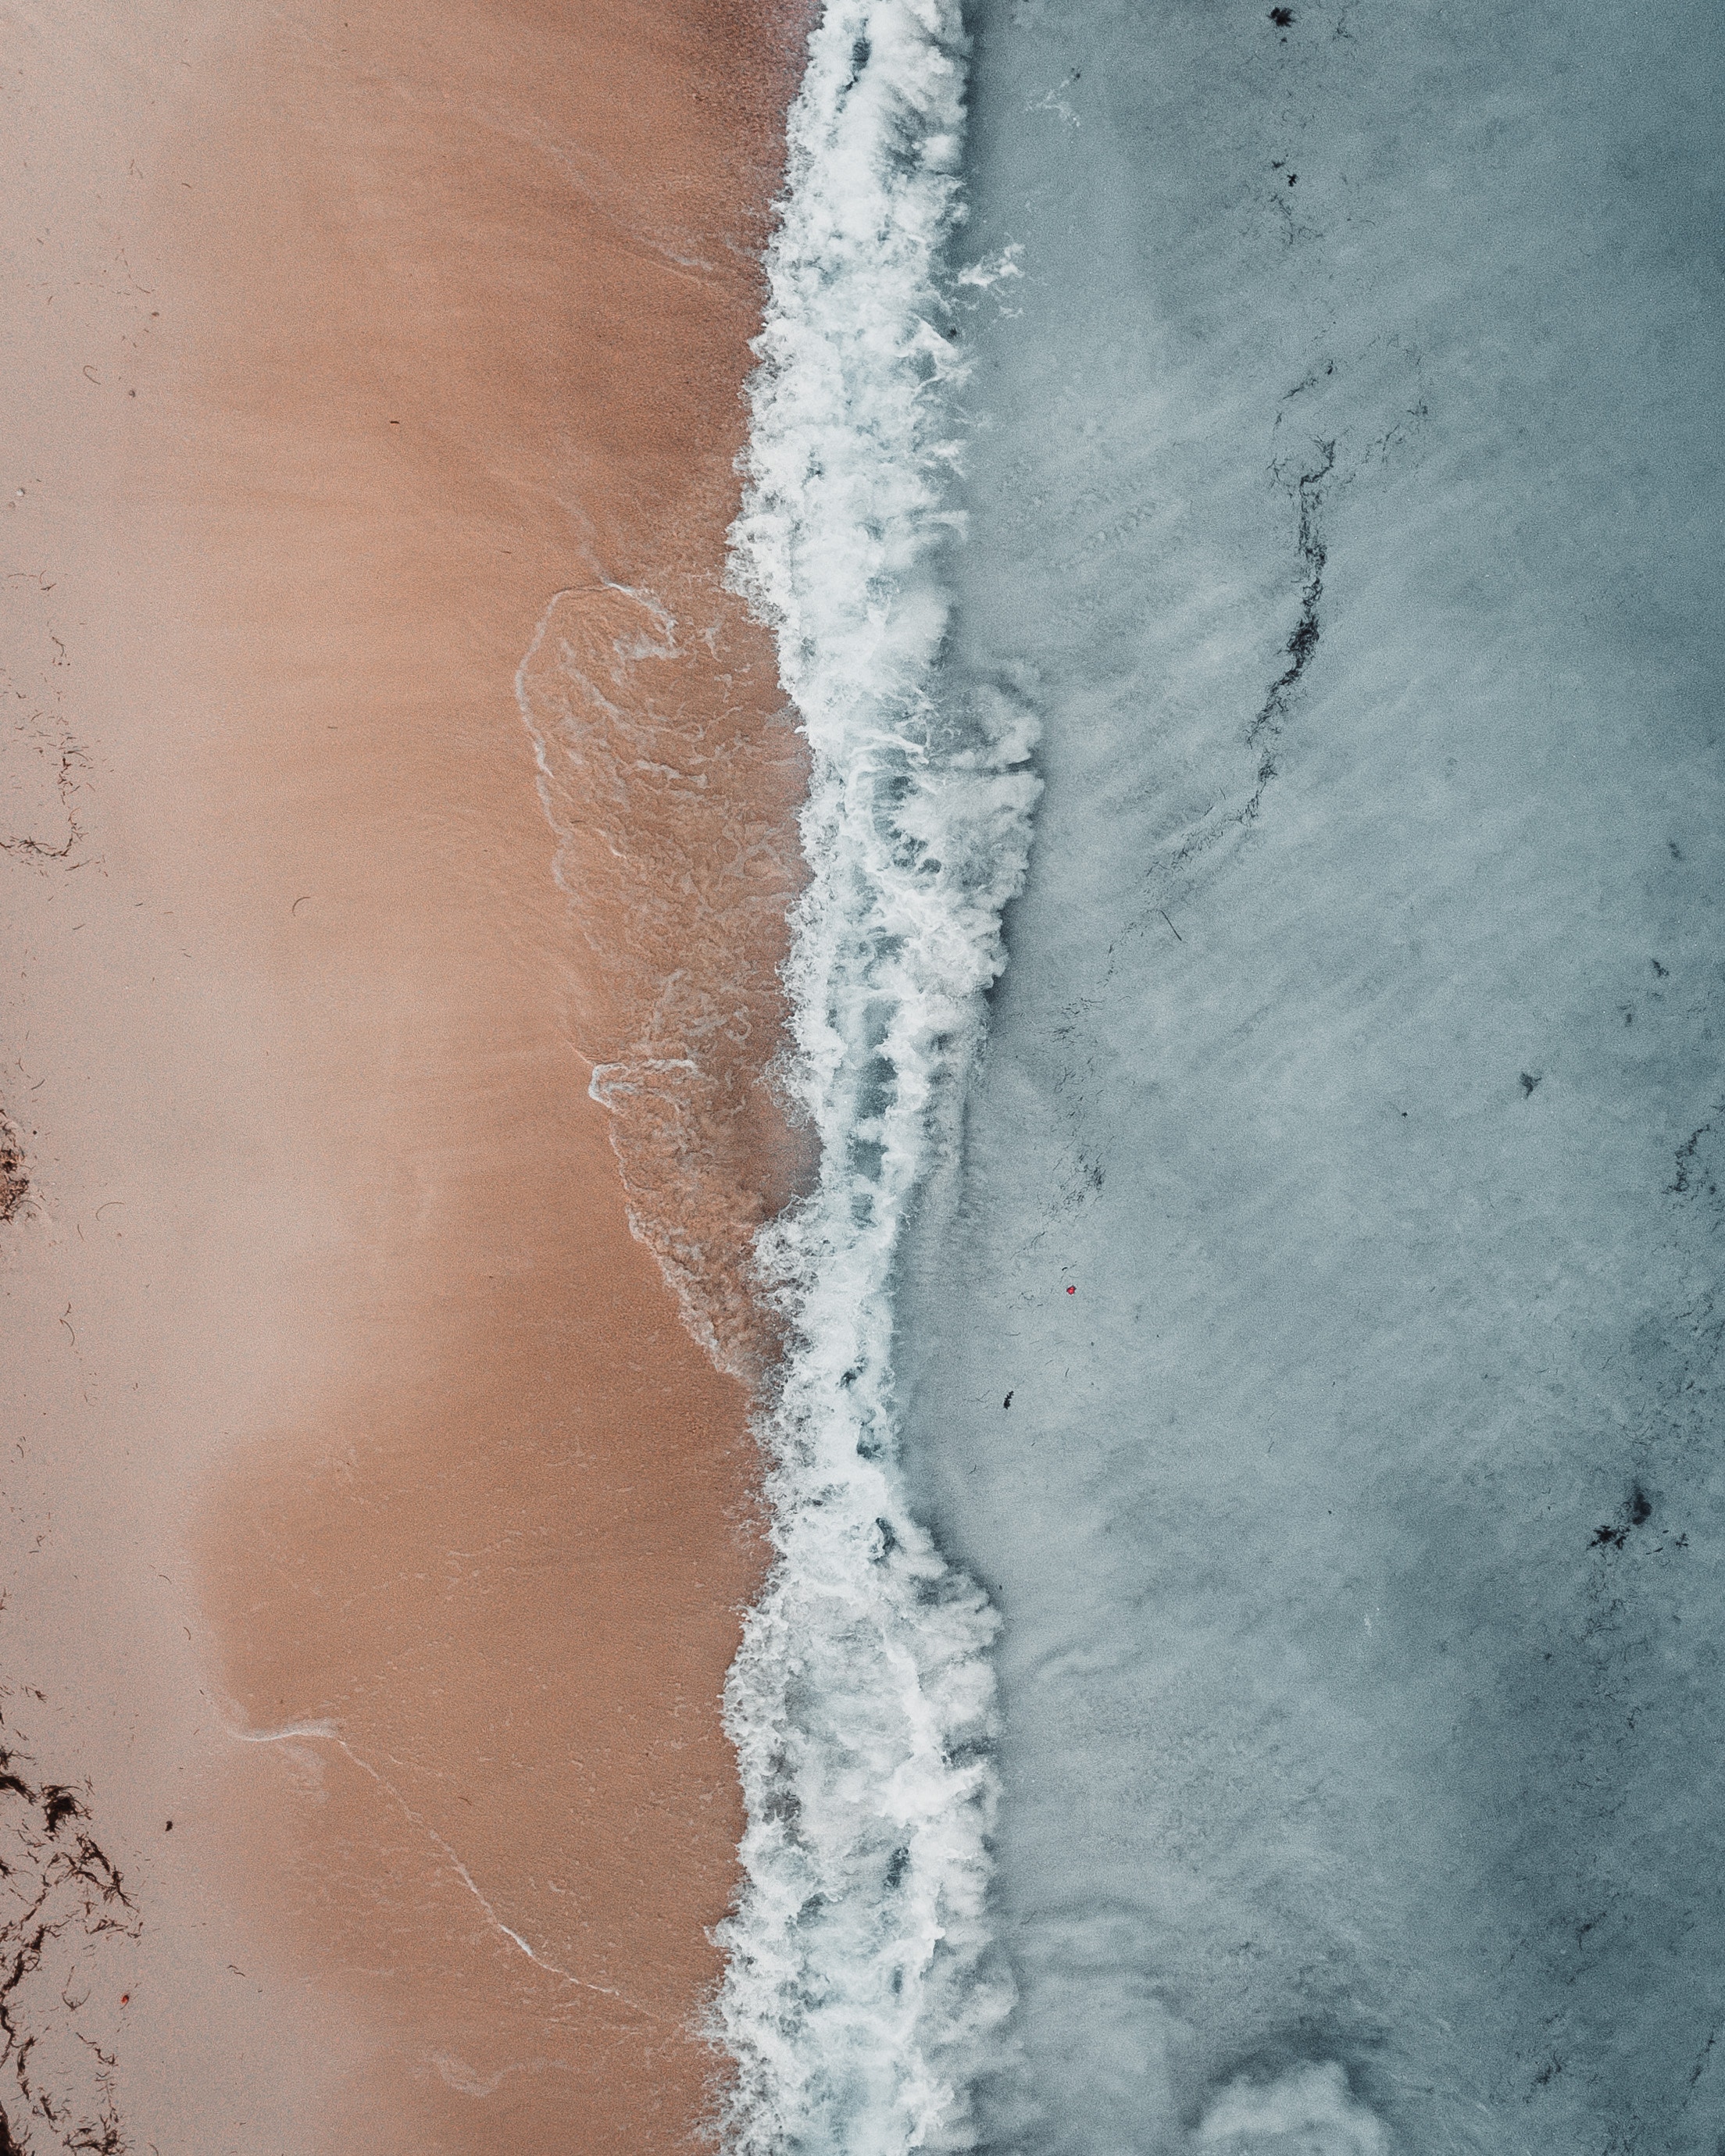 Free HD wave, view from above, nature, sand, shore, bank, ocean, surf